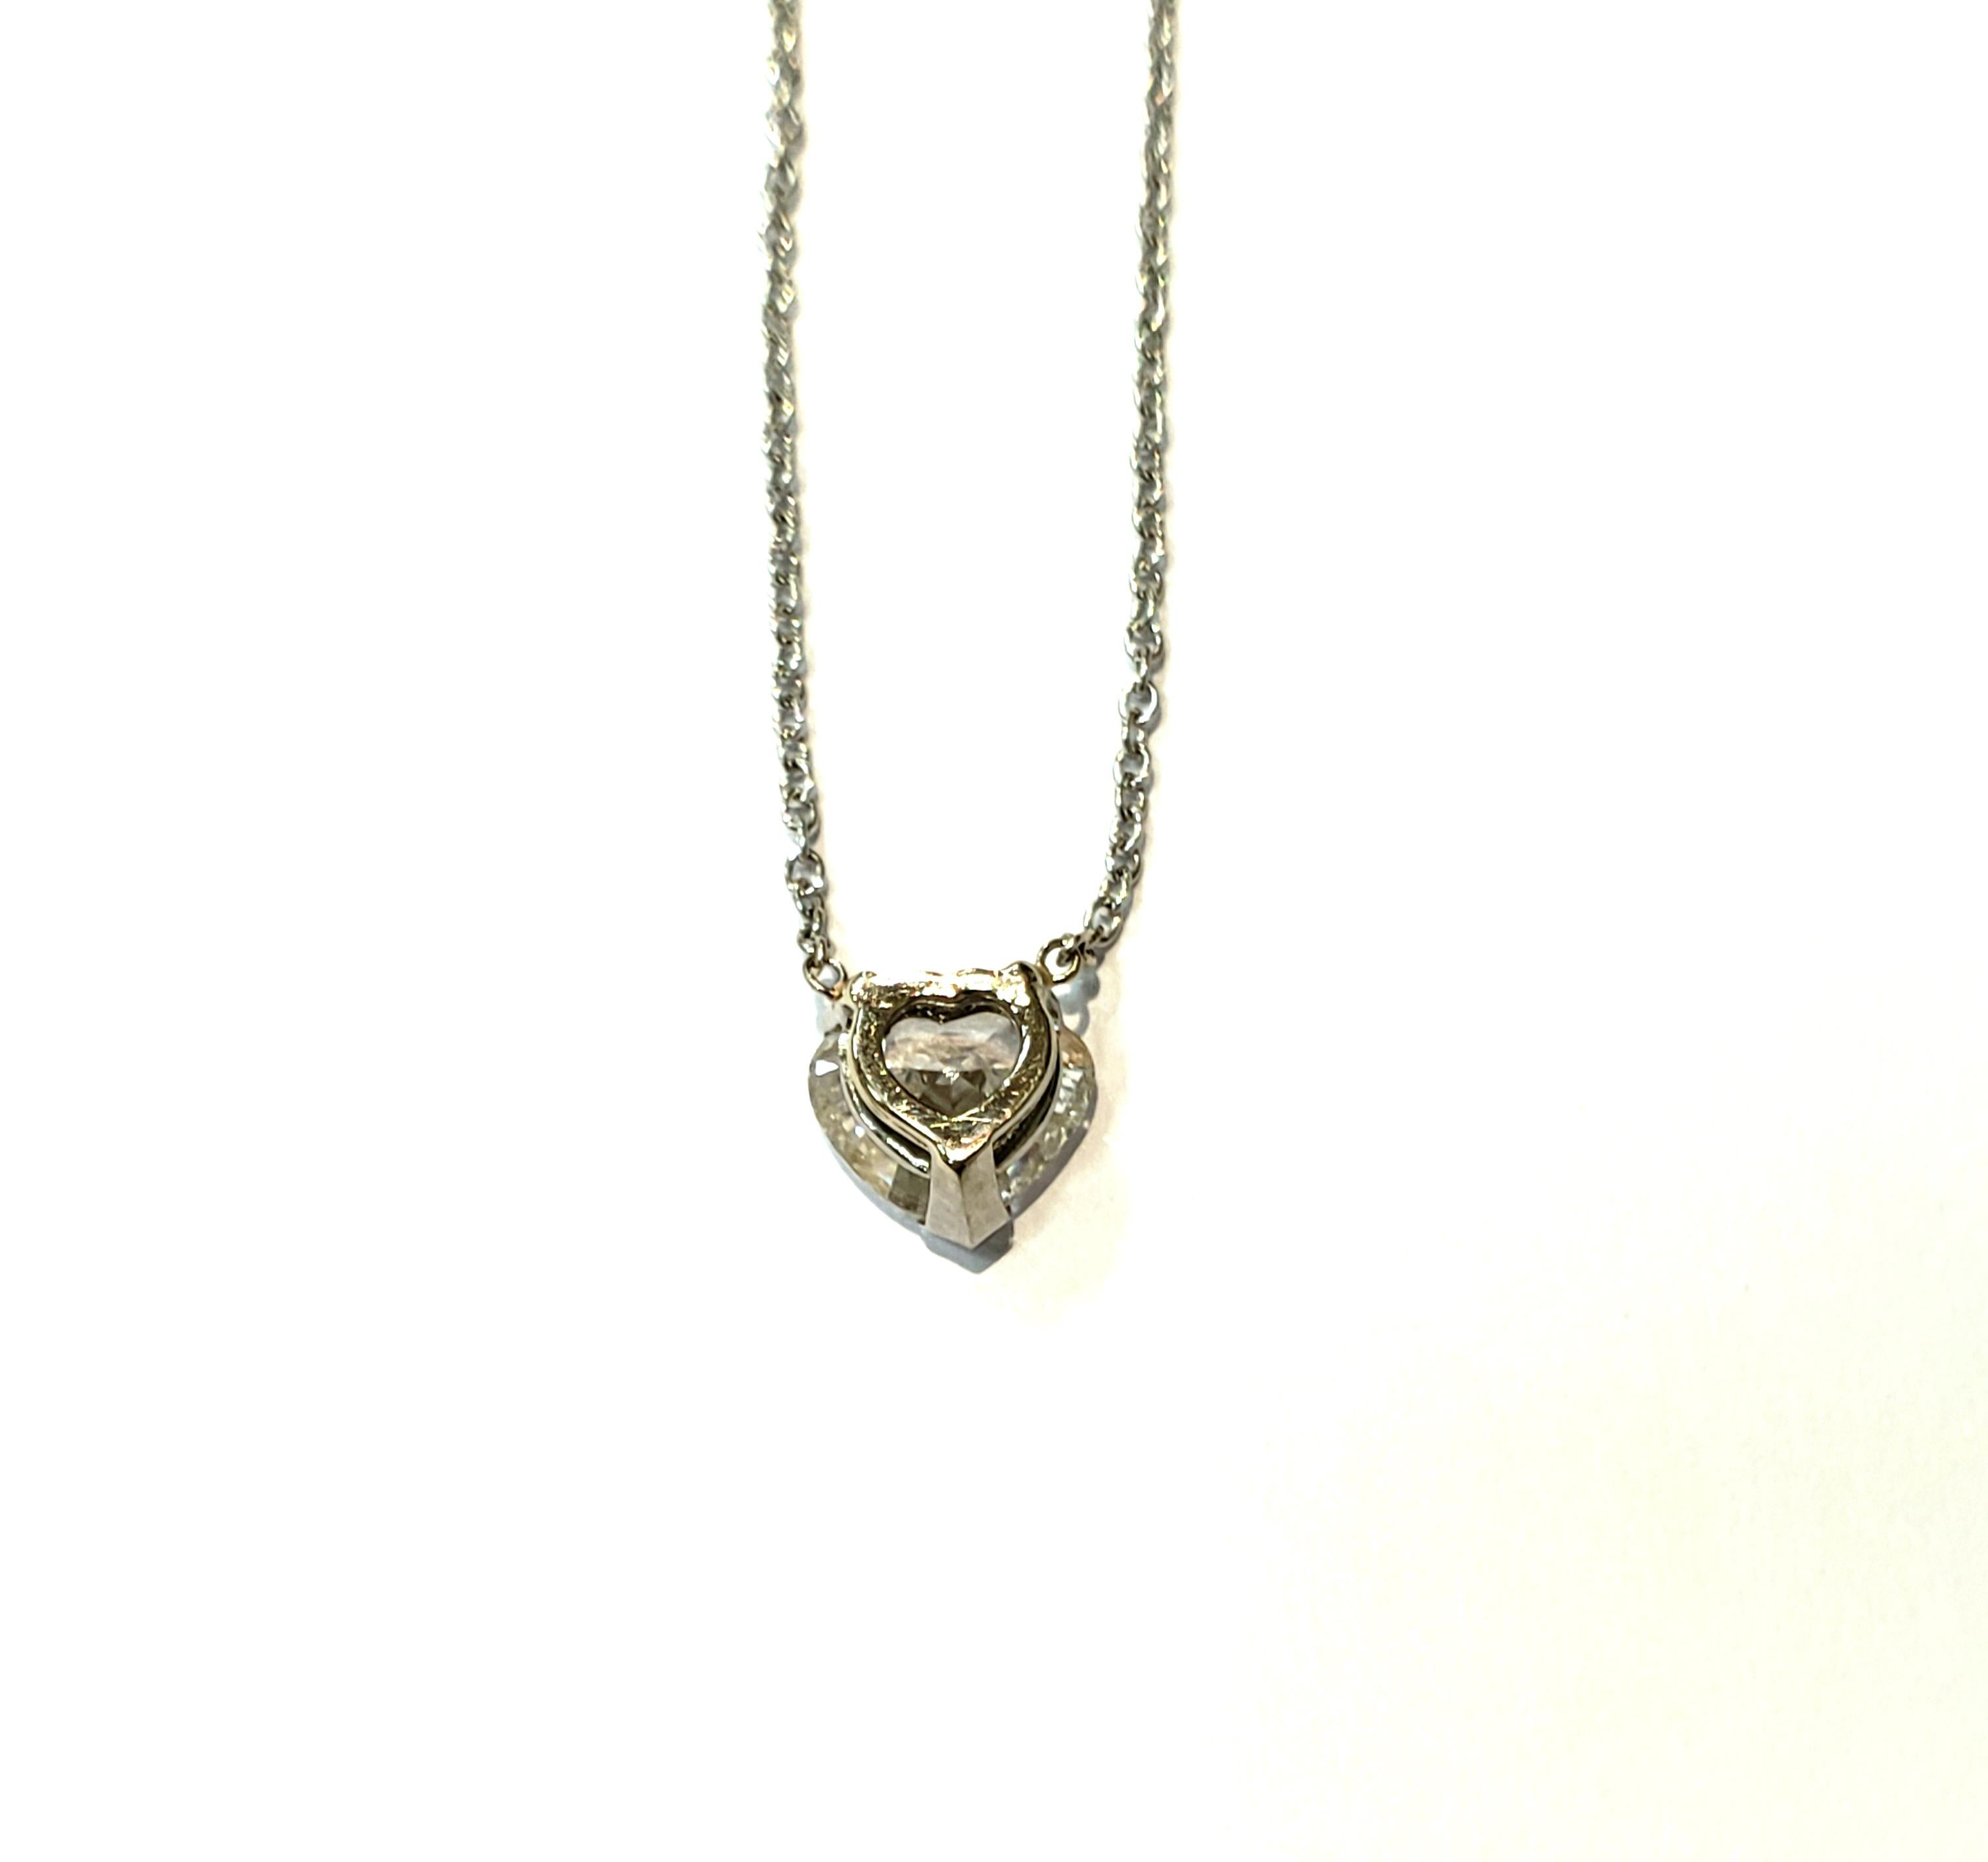 **LOWER PRICE**   A 1.95 Carat Heart Shaped Diamond Solitaire Pendant, Set in a Platinum Basket Mounting, Attached to a 1.3 Millimeter White Gold Chain. Heart Diamond is Approximately 1.95 Carats / F Color / VVS Clarity.
Necklace Measures 16